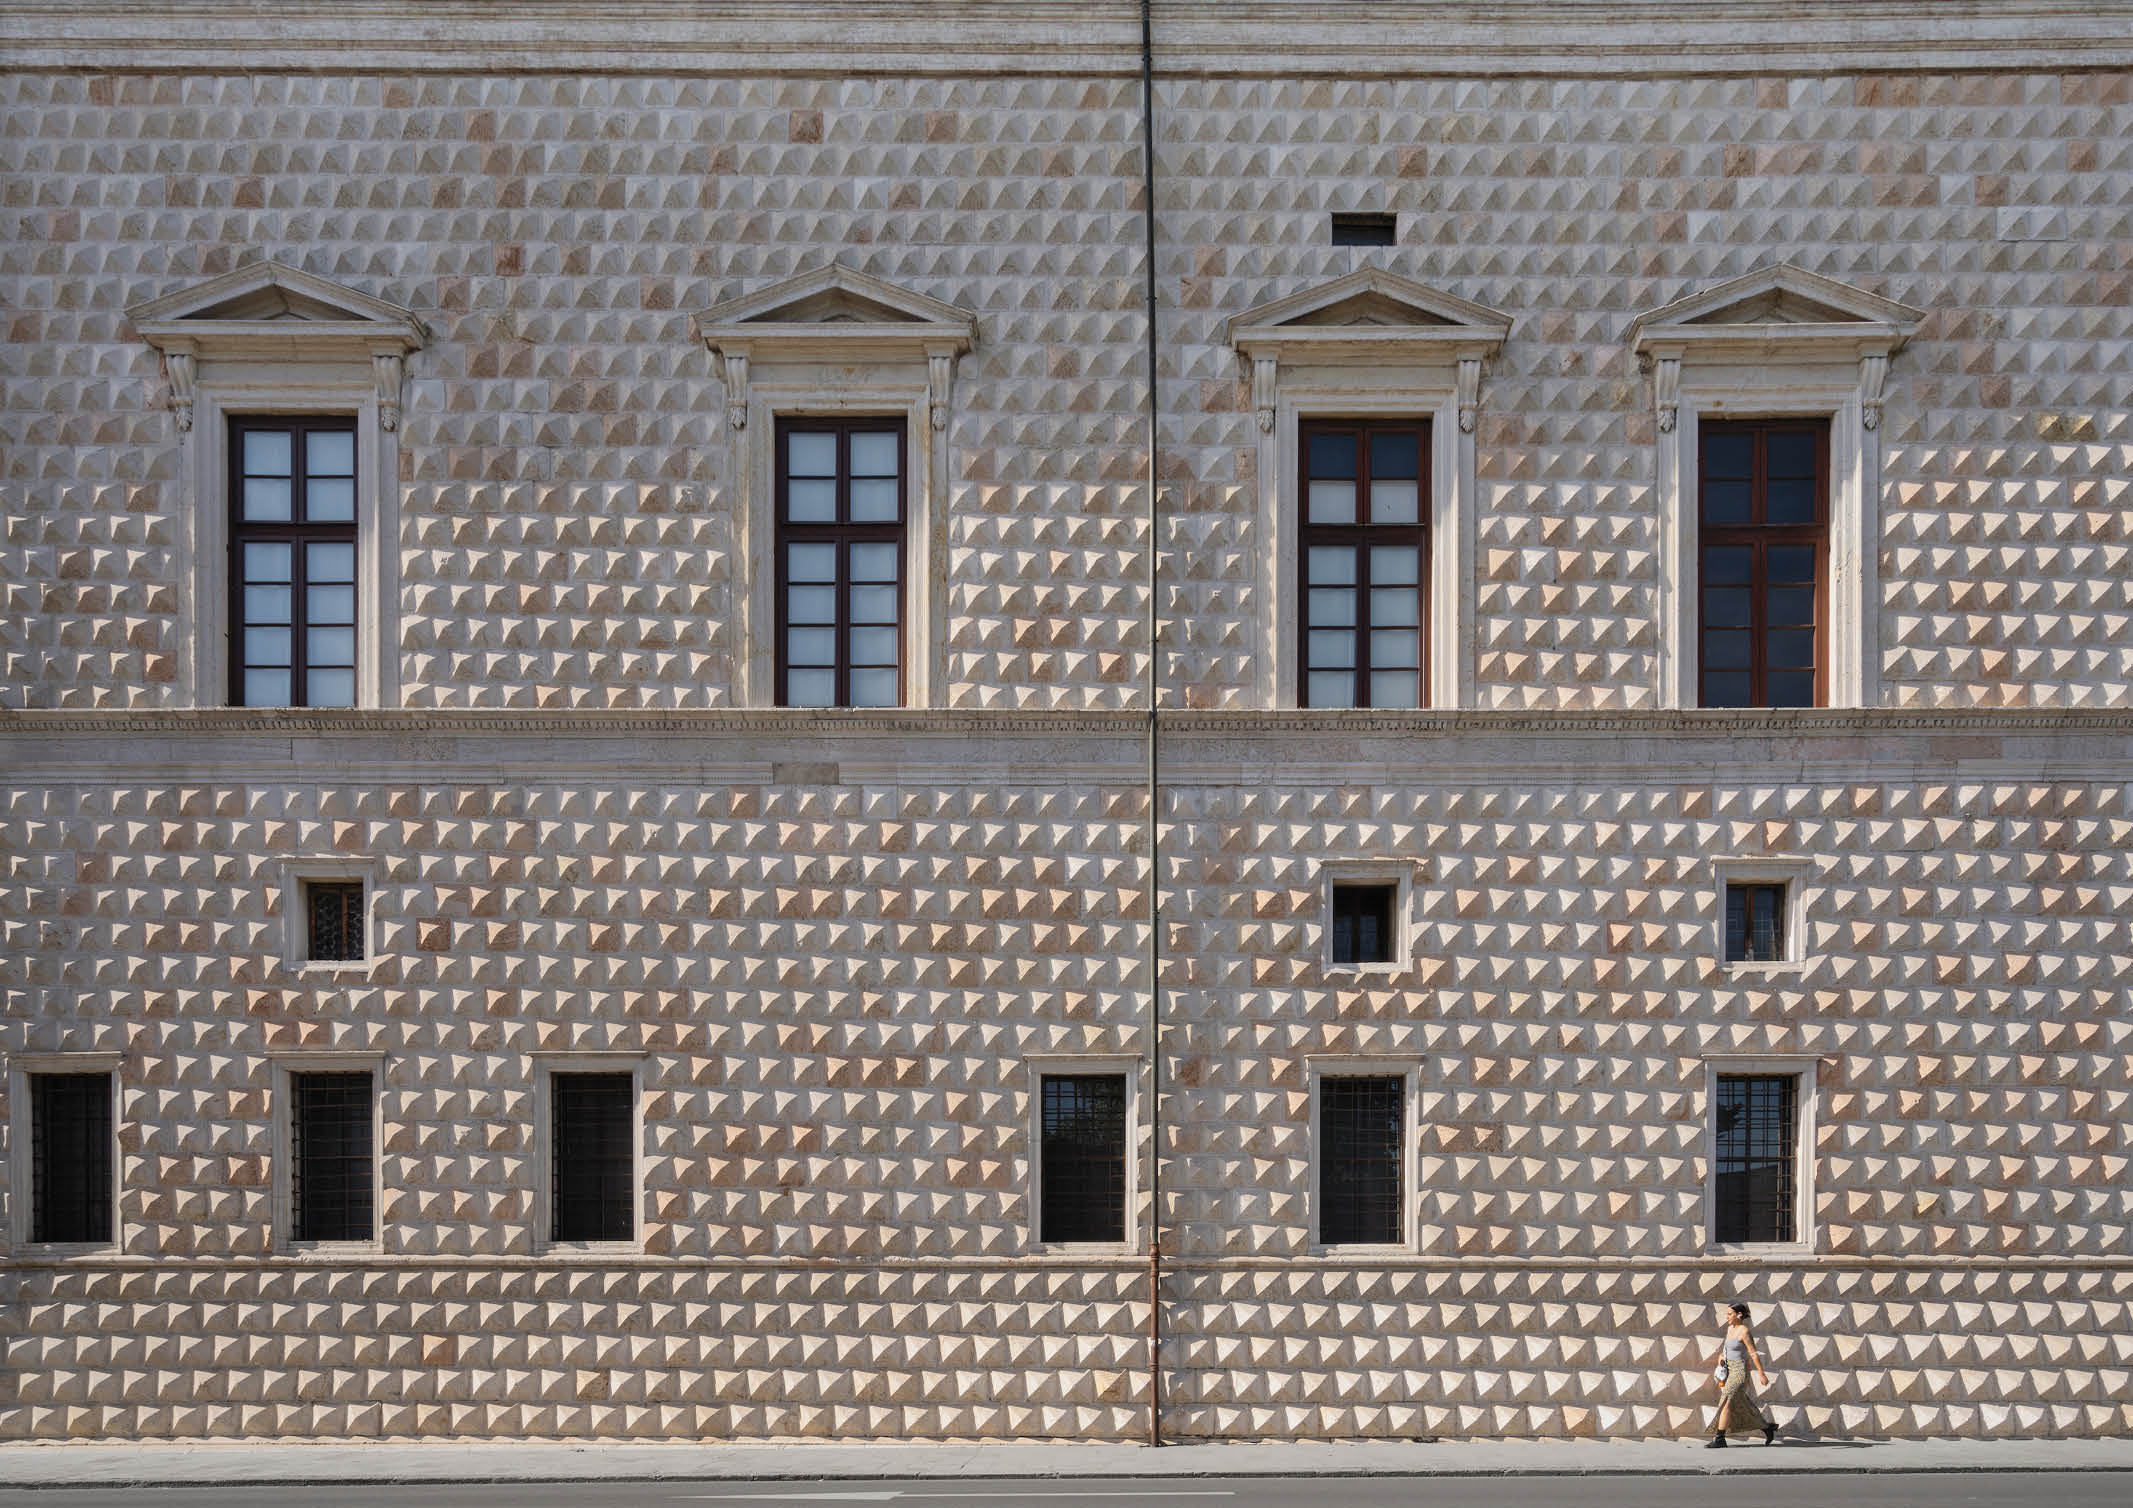 Palazzo dei Diamanti Reopens With A New Look